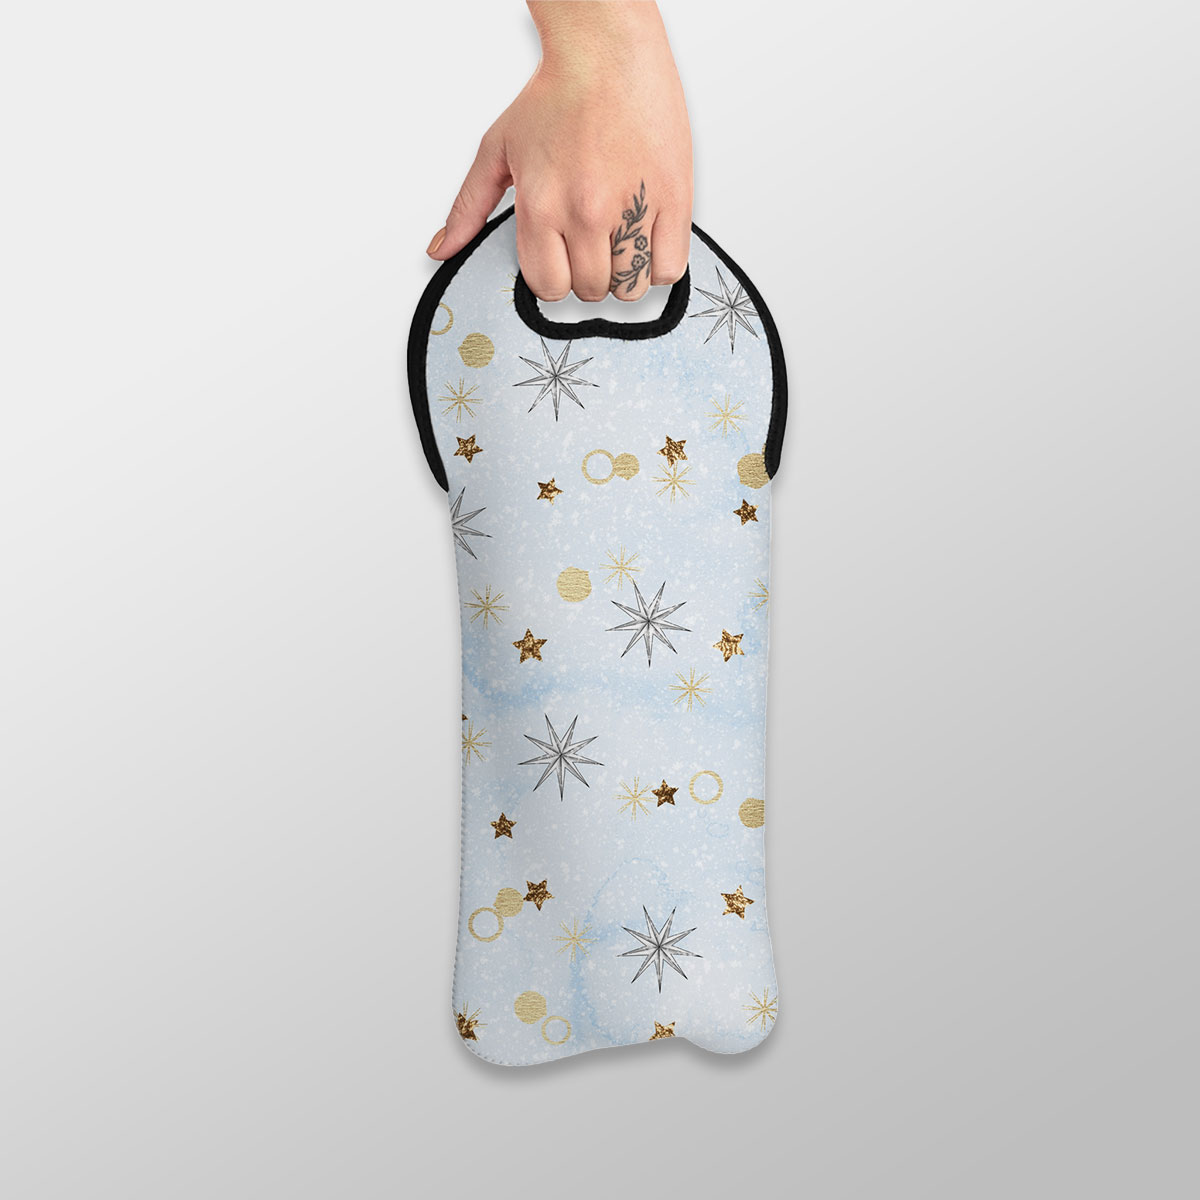 Gold Christmas Star On Snowflake Background Wine Tote Bag